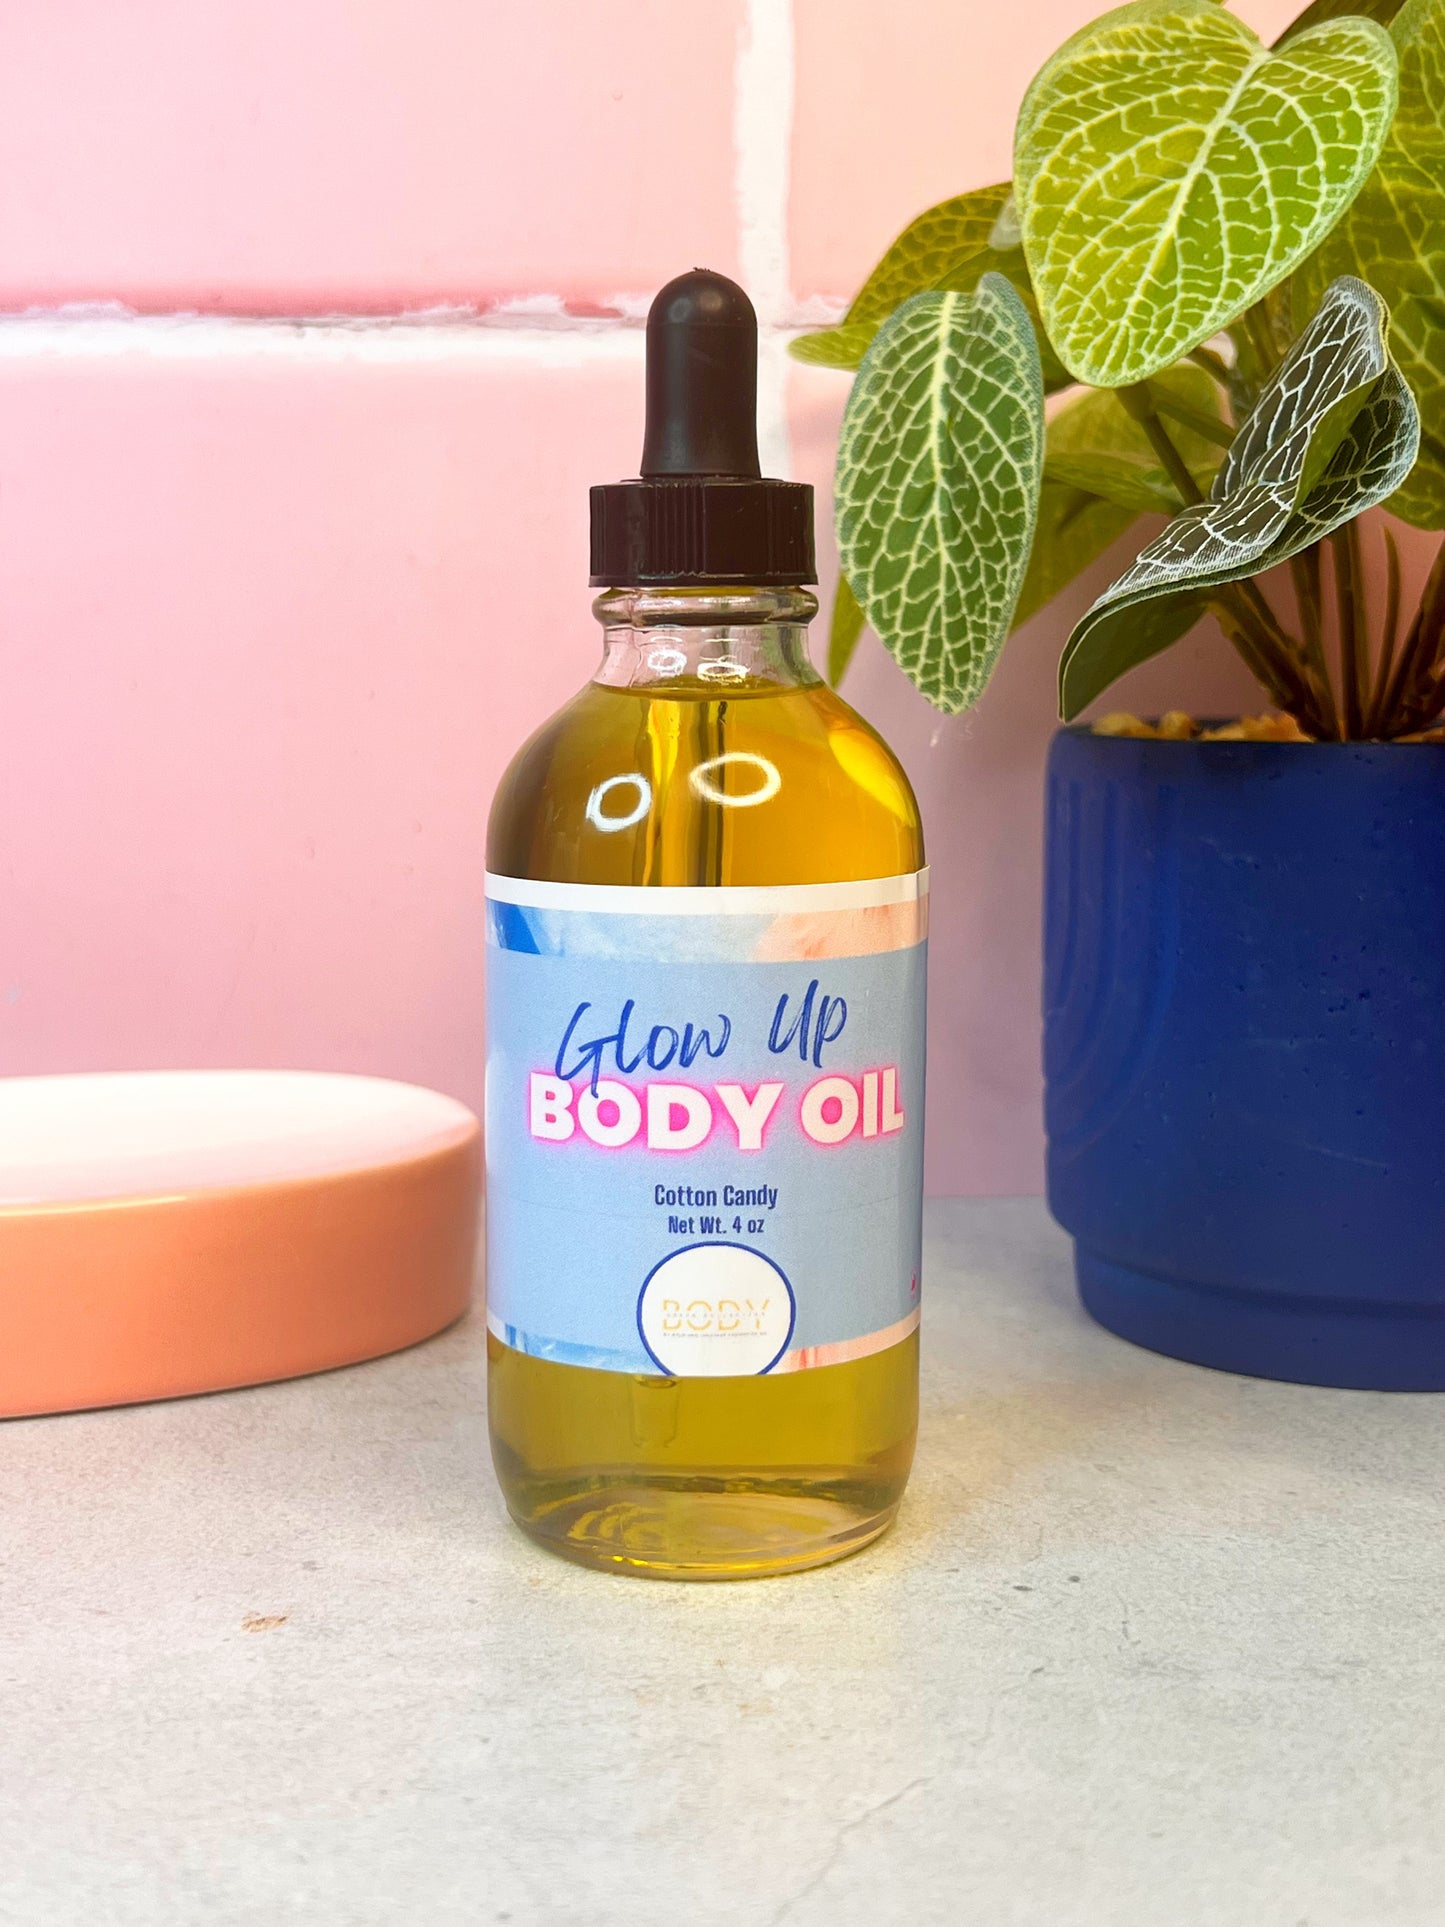 Body Oil "Cotton Candy"